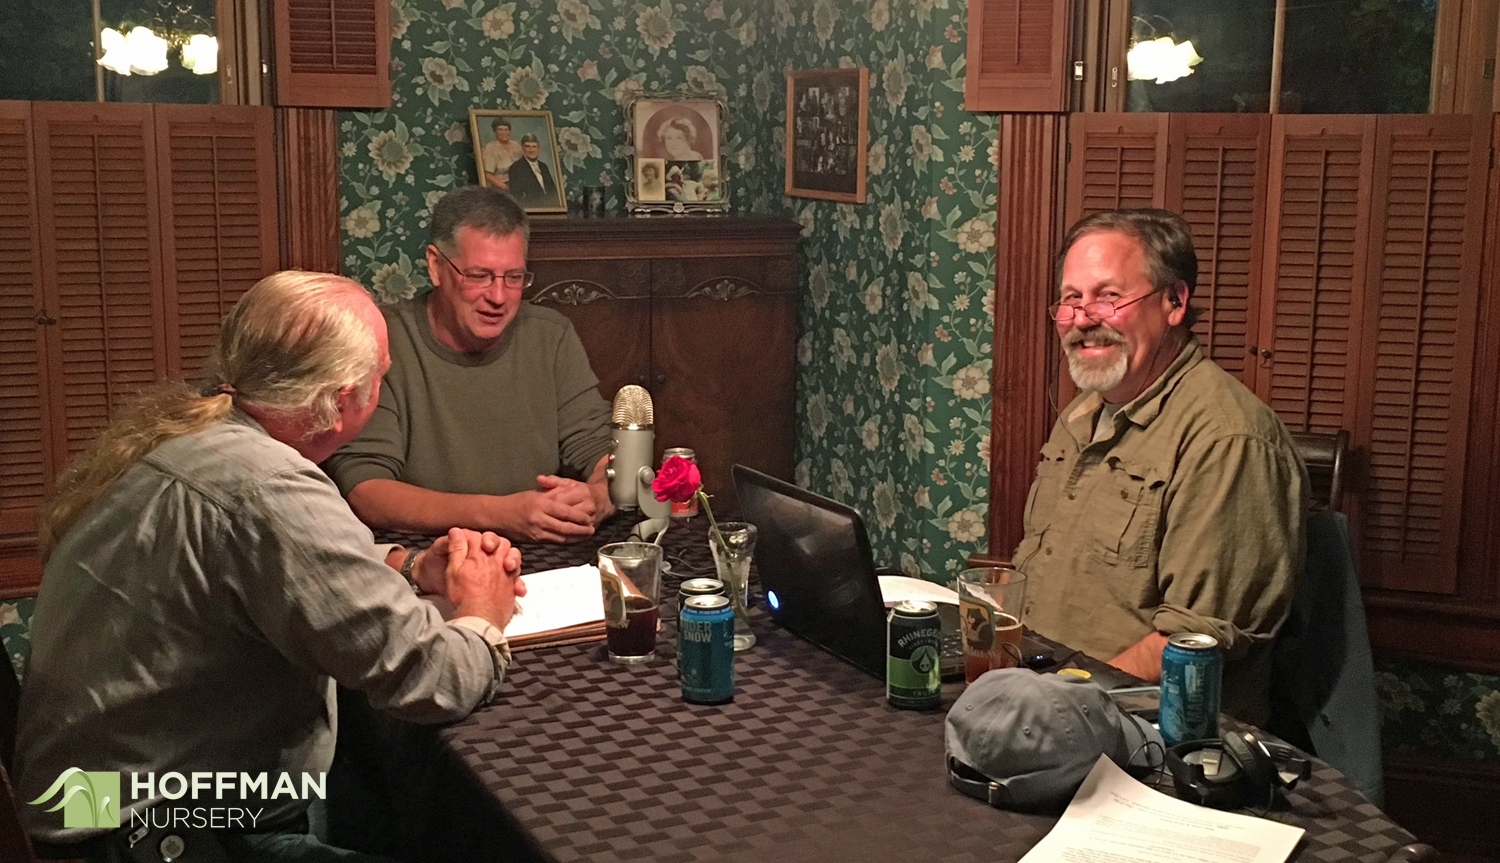 John Magee (R) and Mike Berkley (L) interview Brian Jorg about the Zoo's native plant gardens.